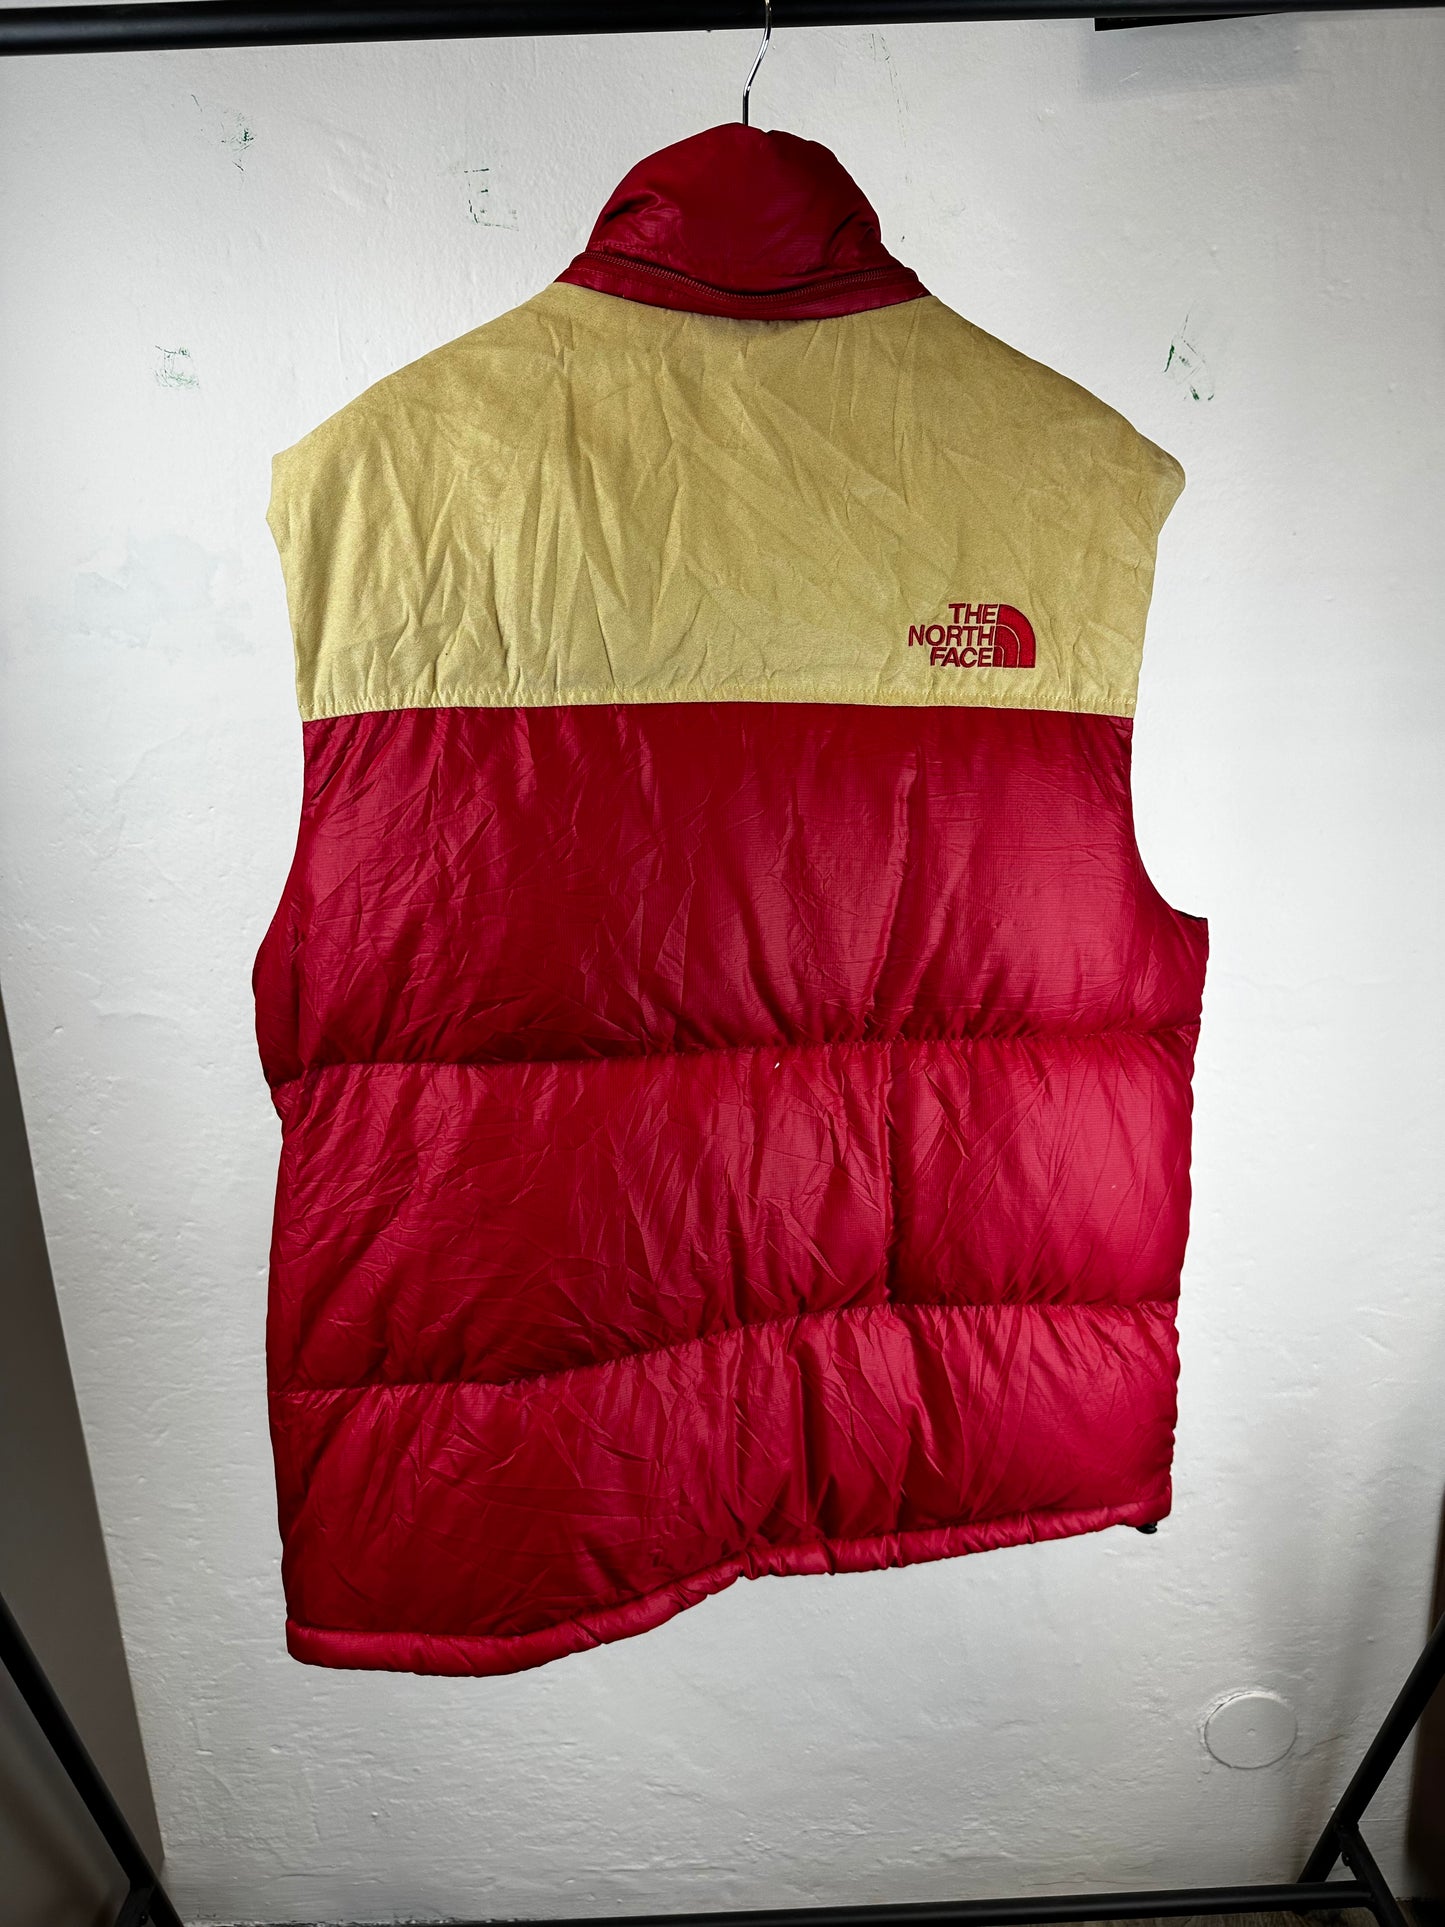 North Face Puffer Vest - size M